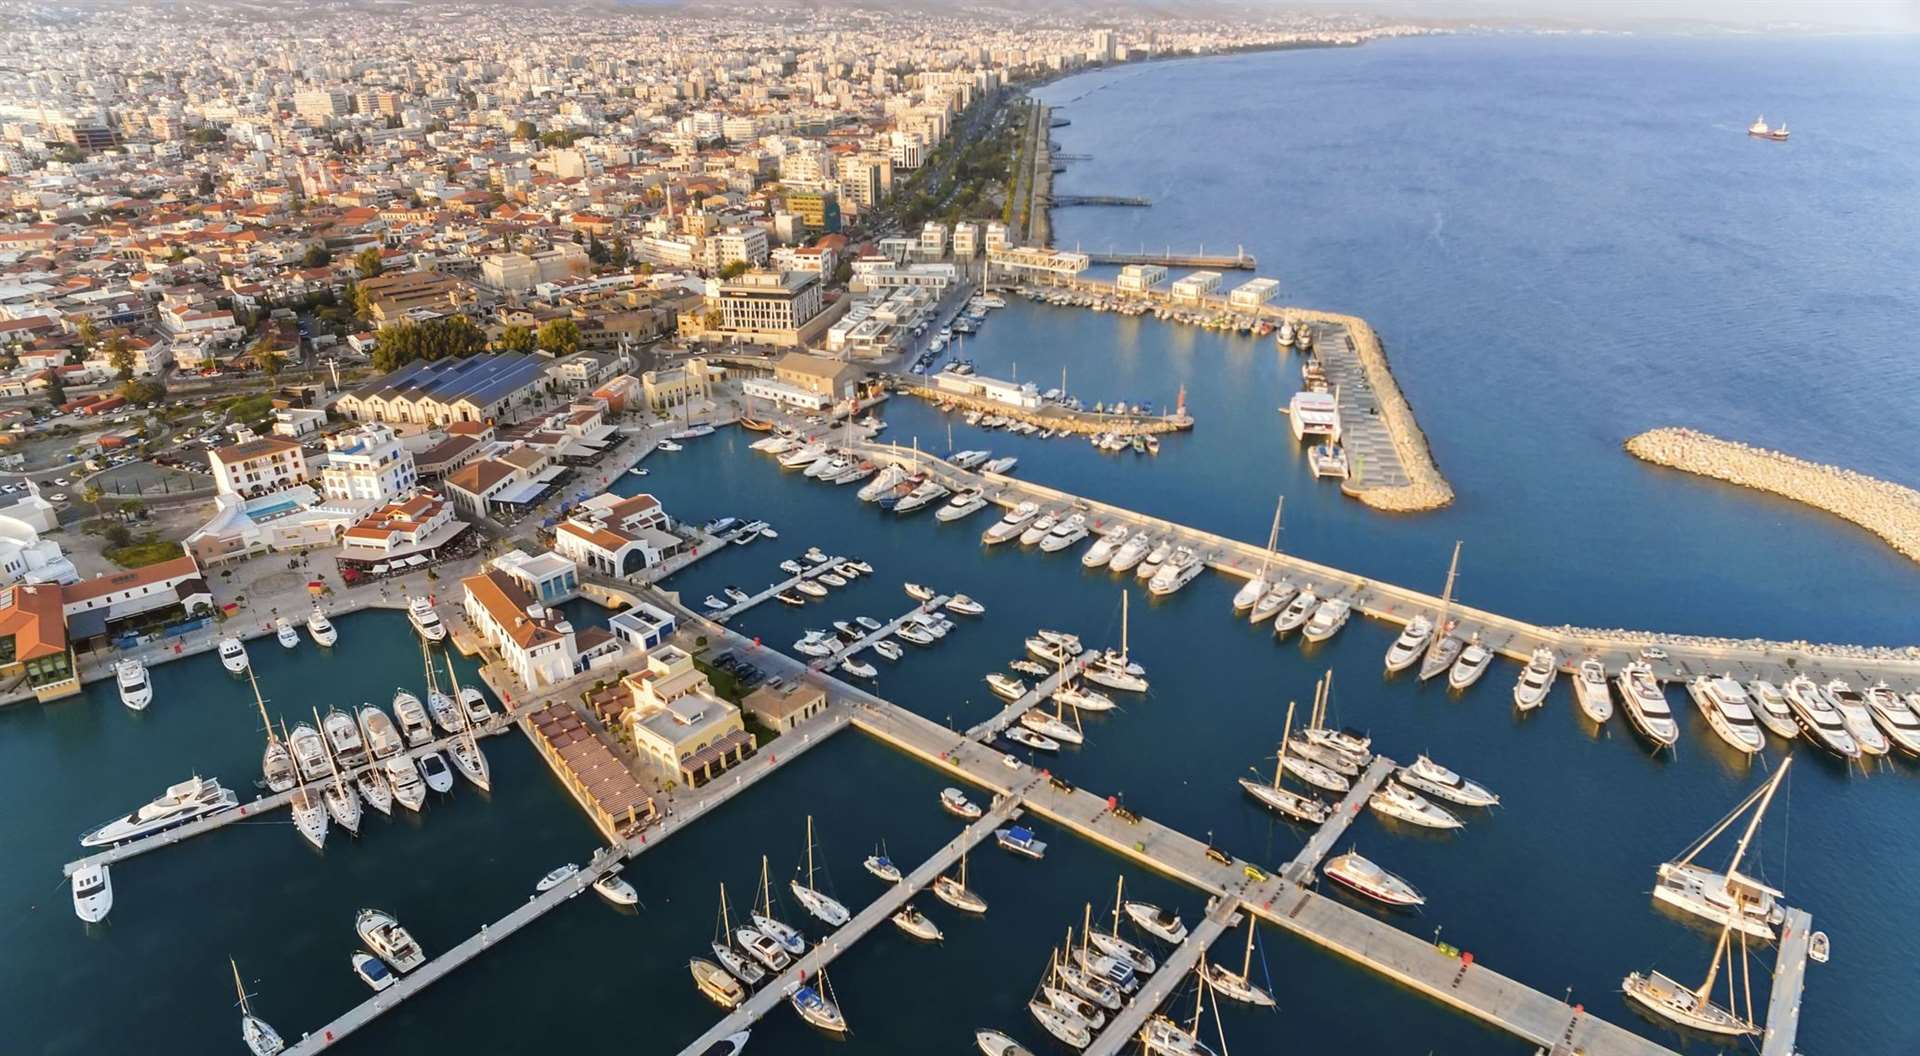 Limassol in Cyprus is very popular for tourists and has all the modern facilities of any European city. Staysure will be on hand to help you where ever you go in the world.